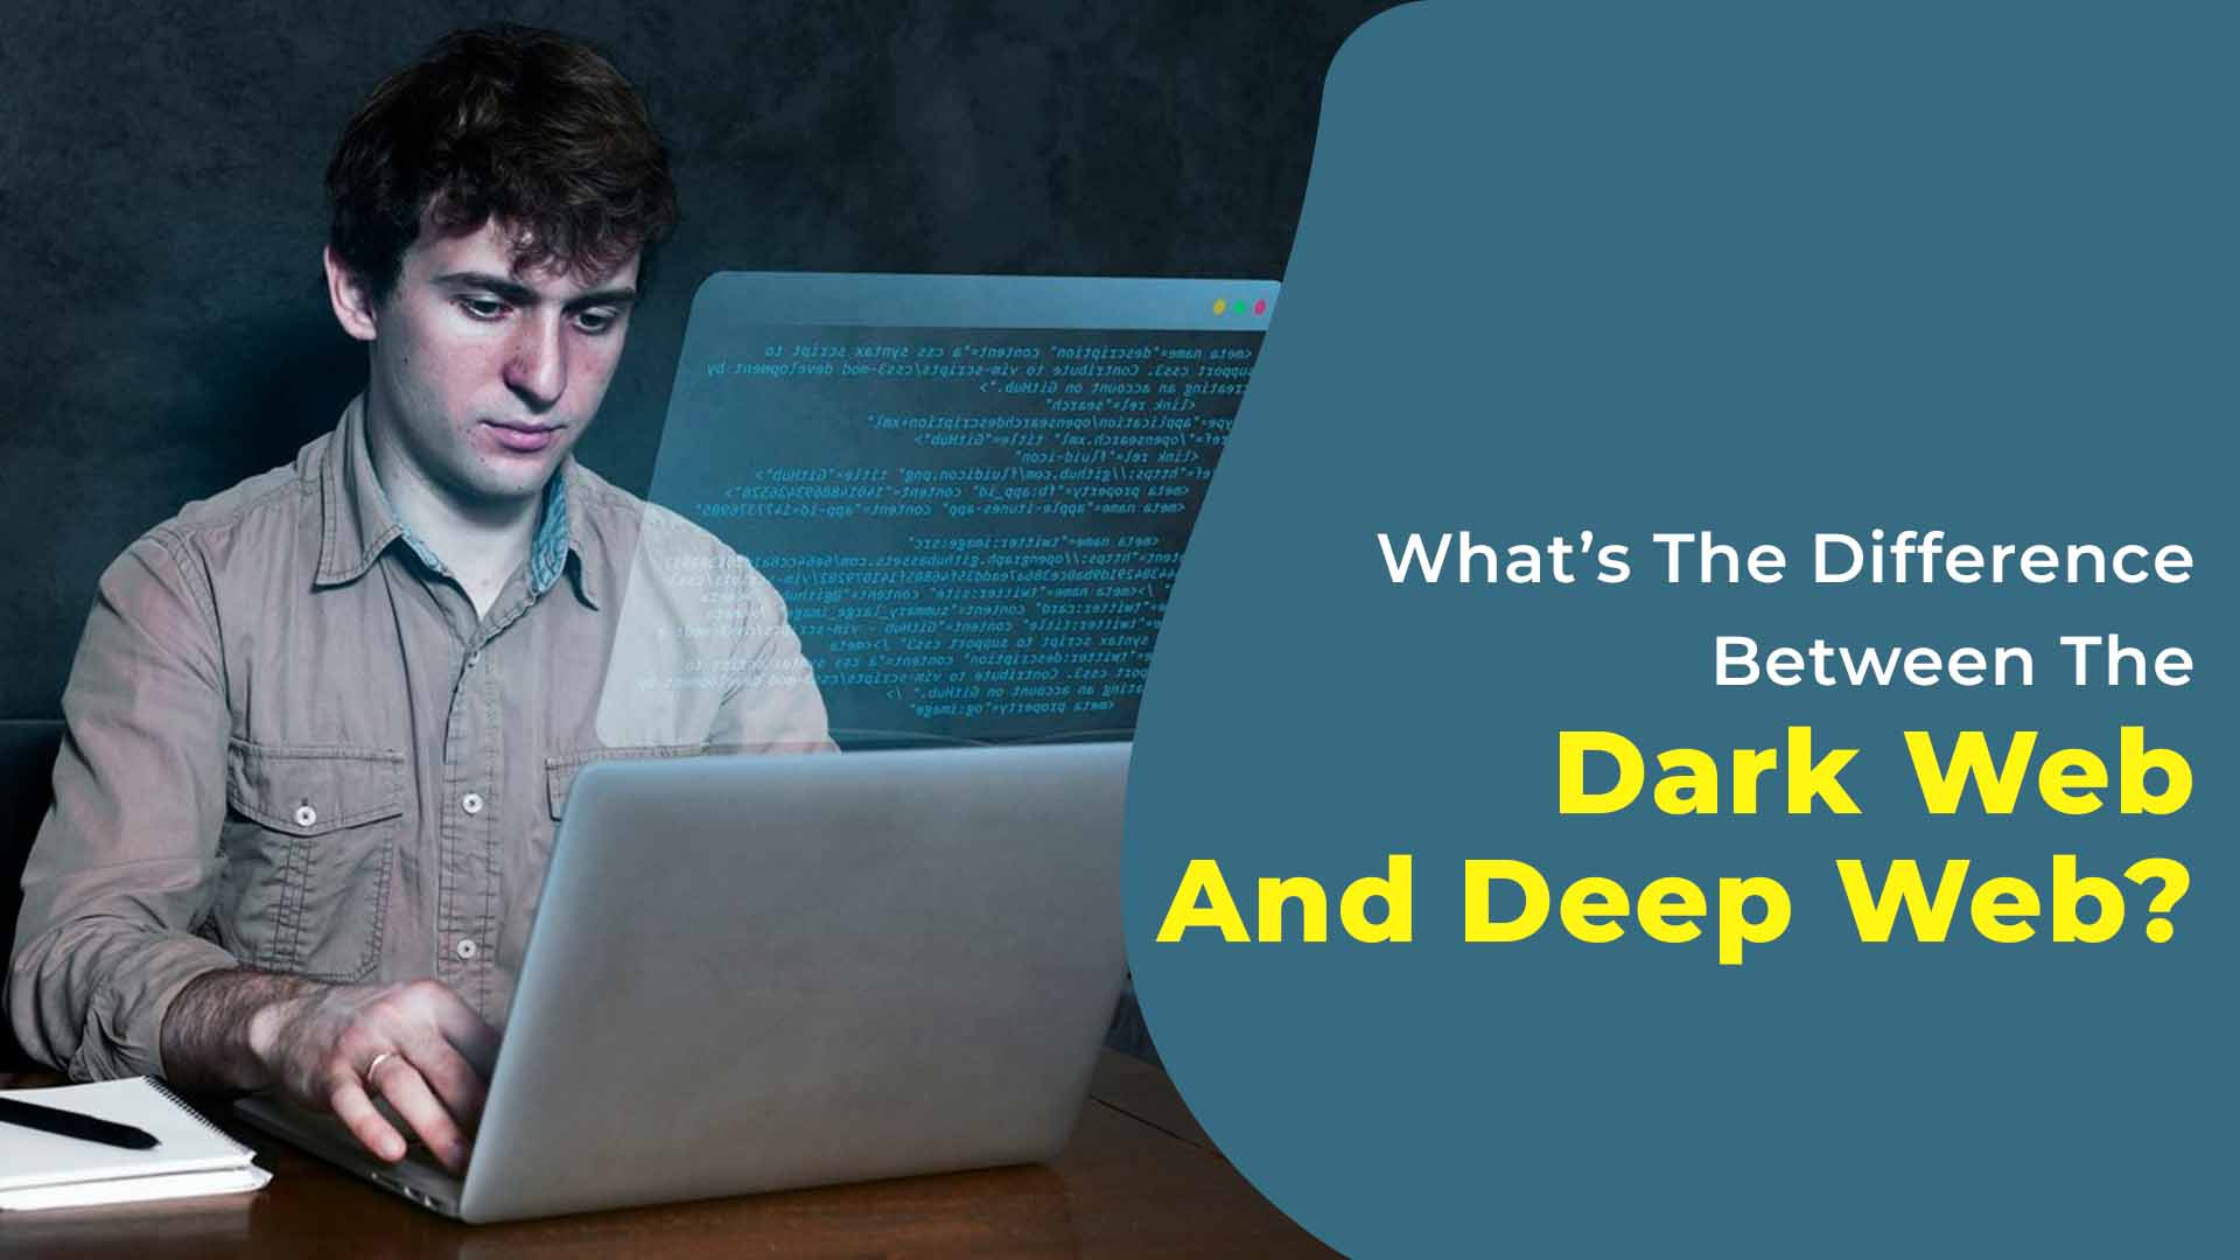 What’s The Difference Between The Dark Web And Deep Web?